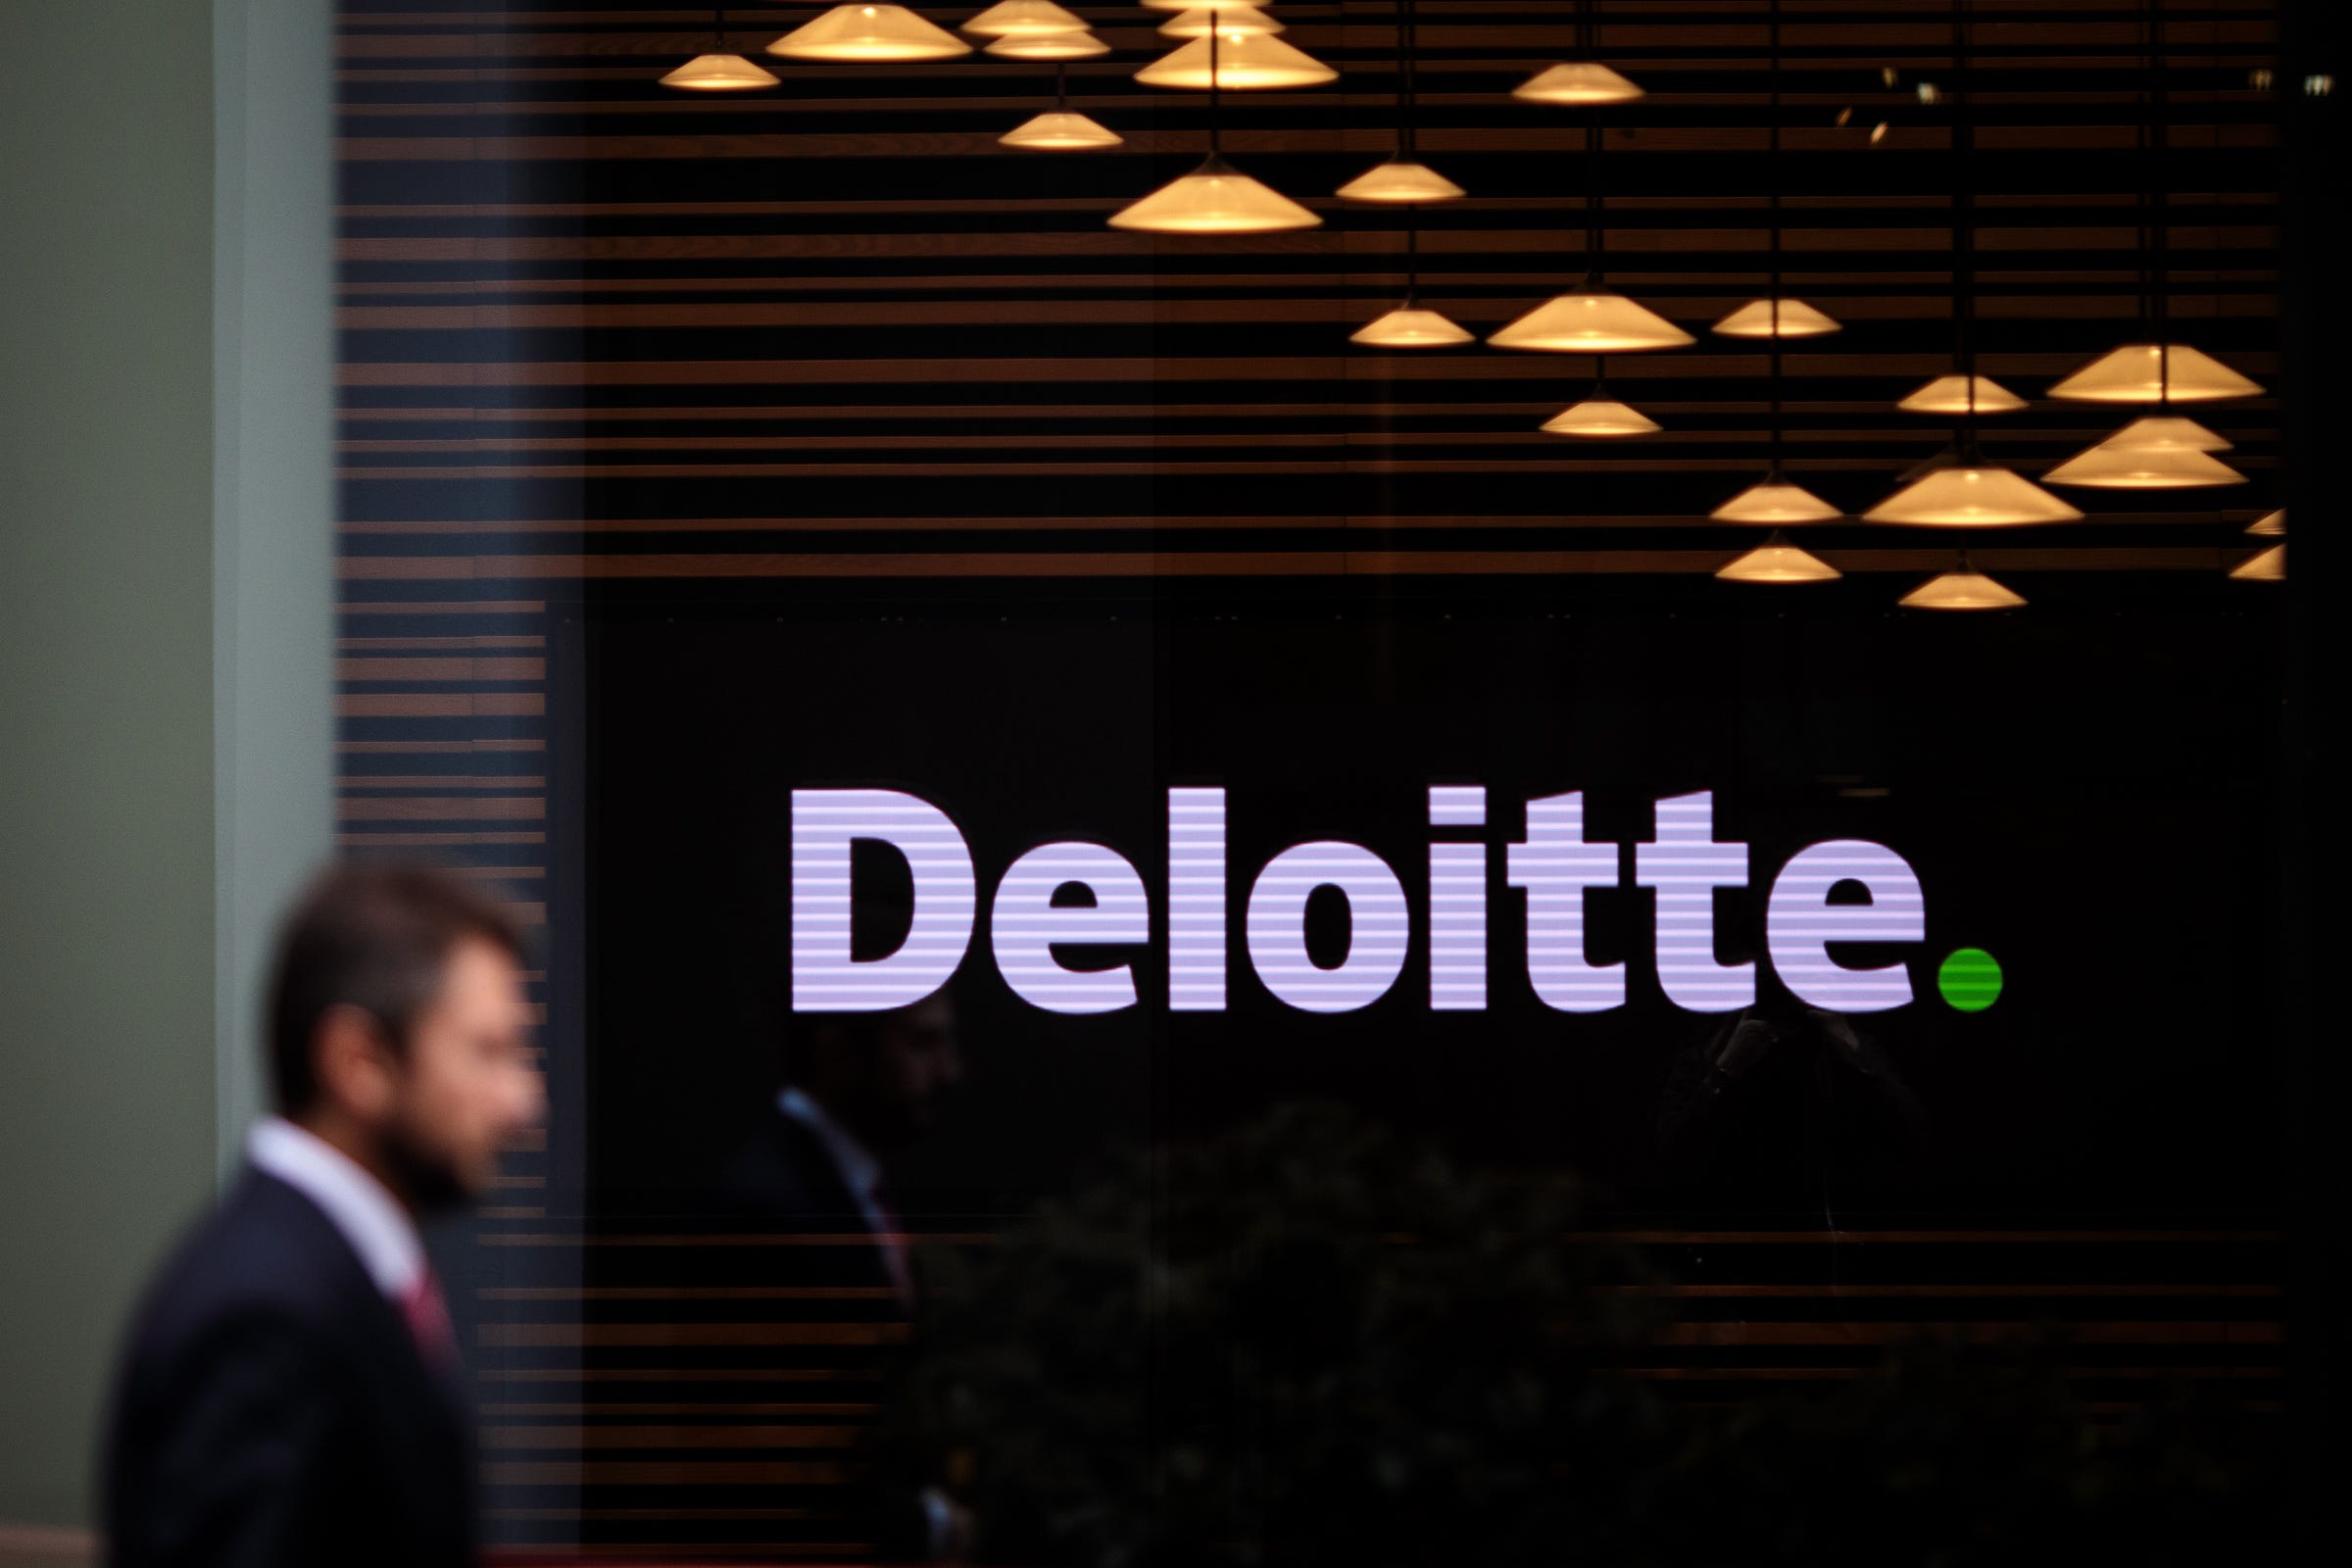 39% of the world's largest companies already use blockchain, according to Deloitte